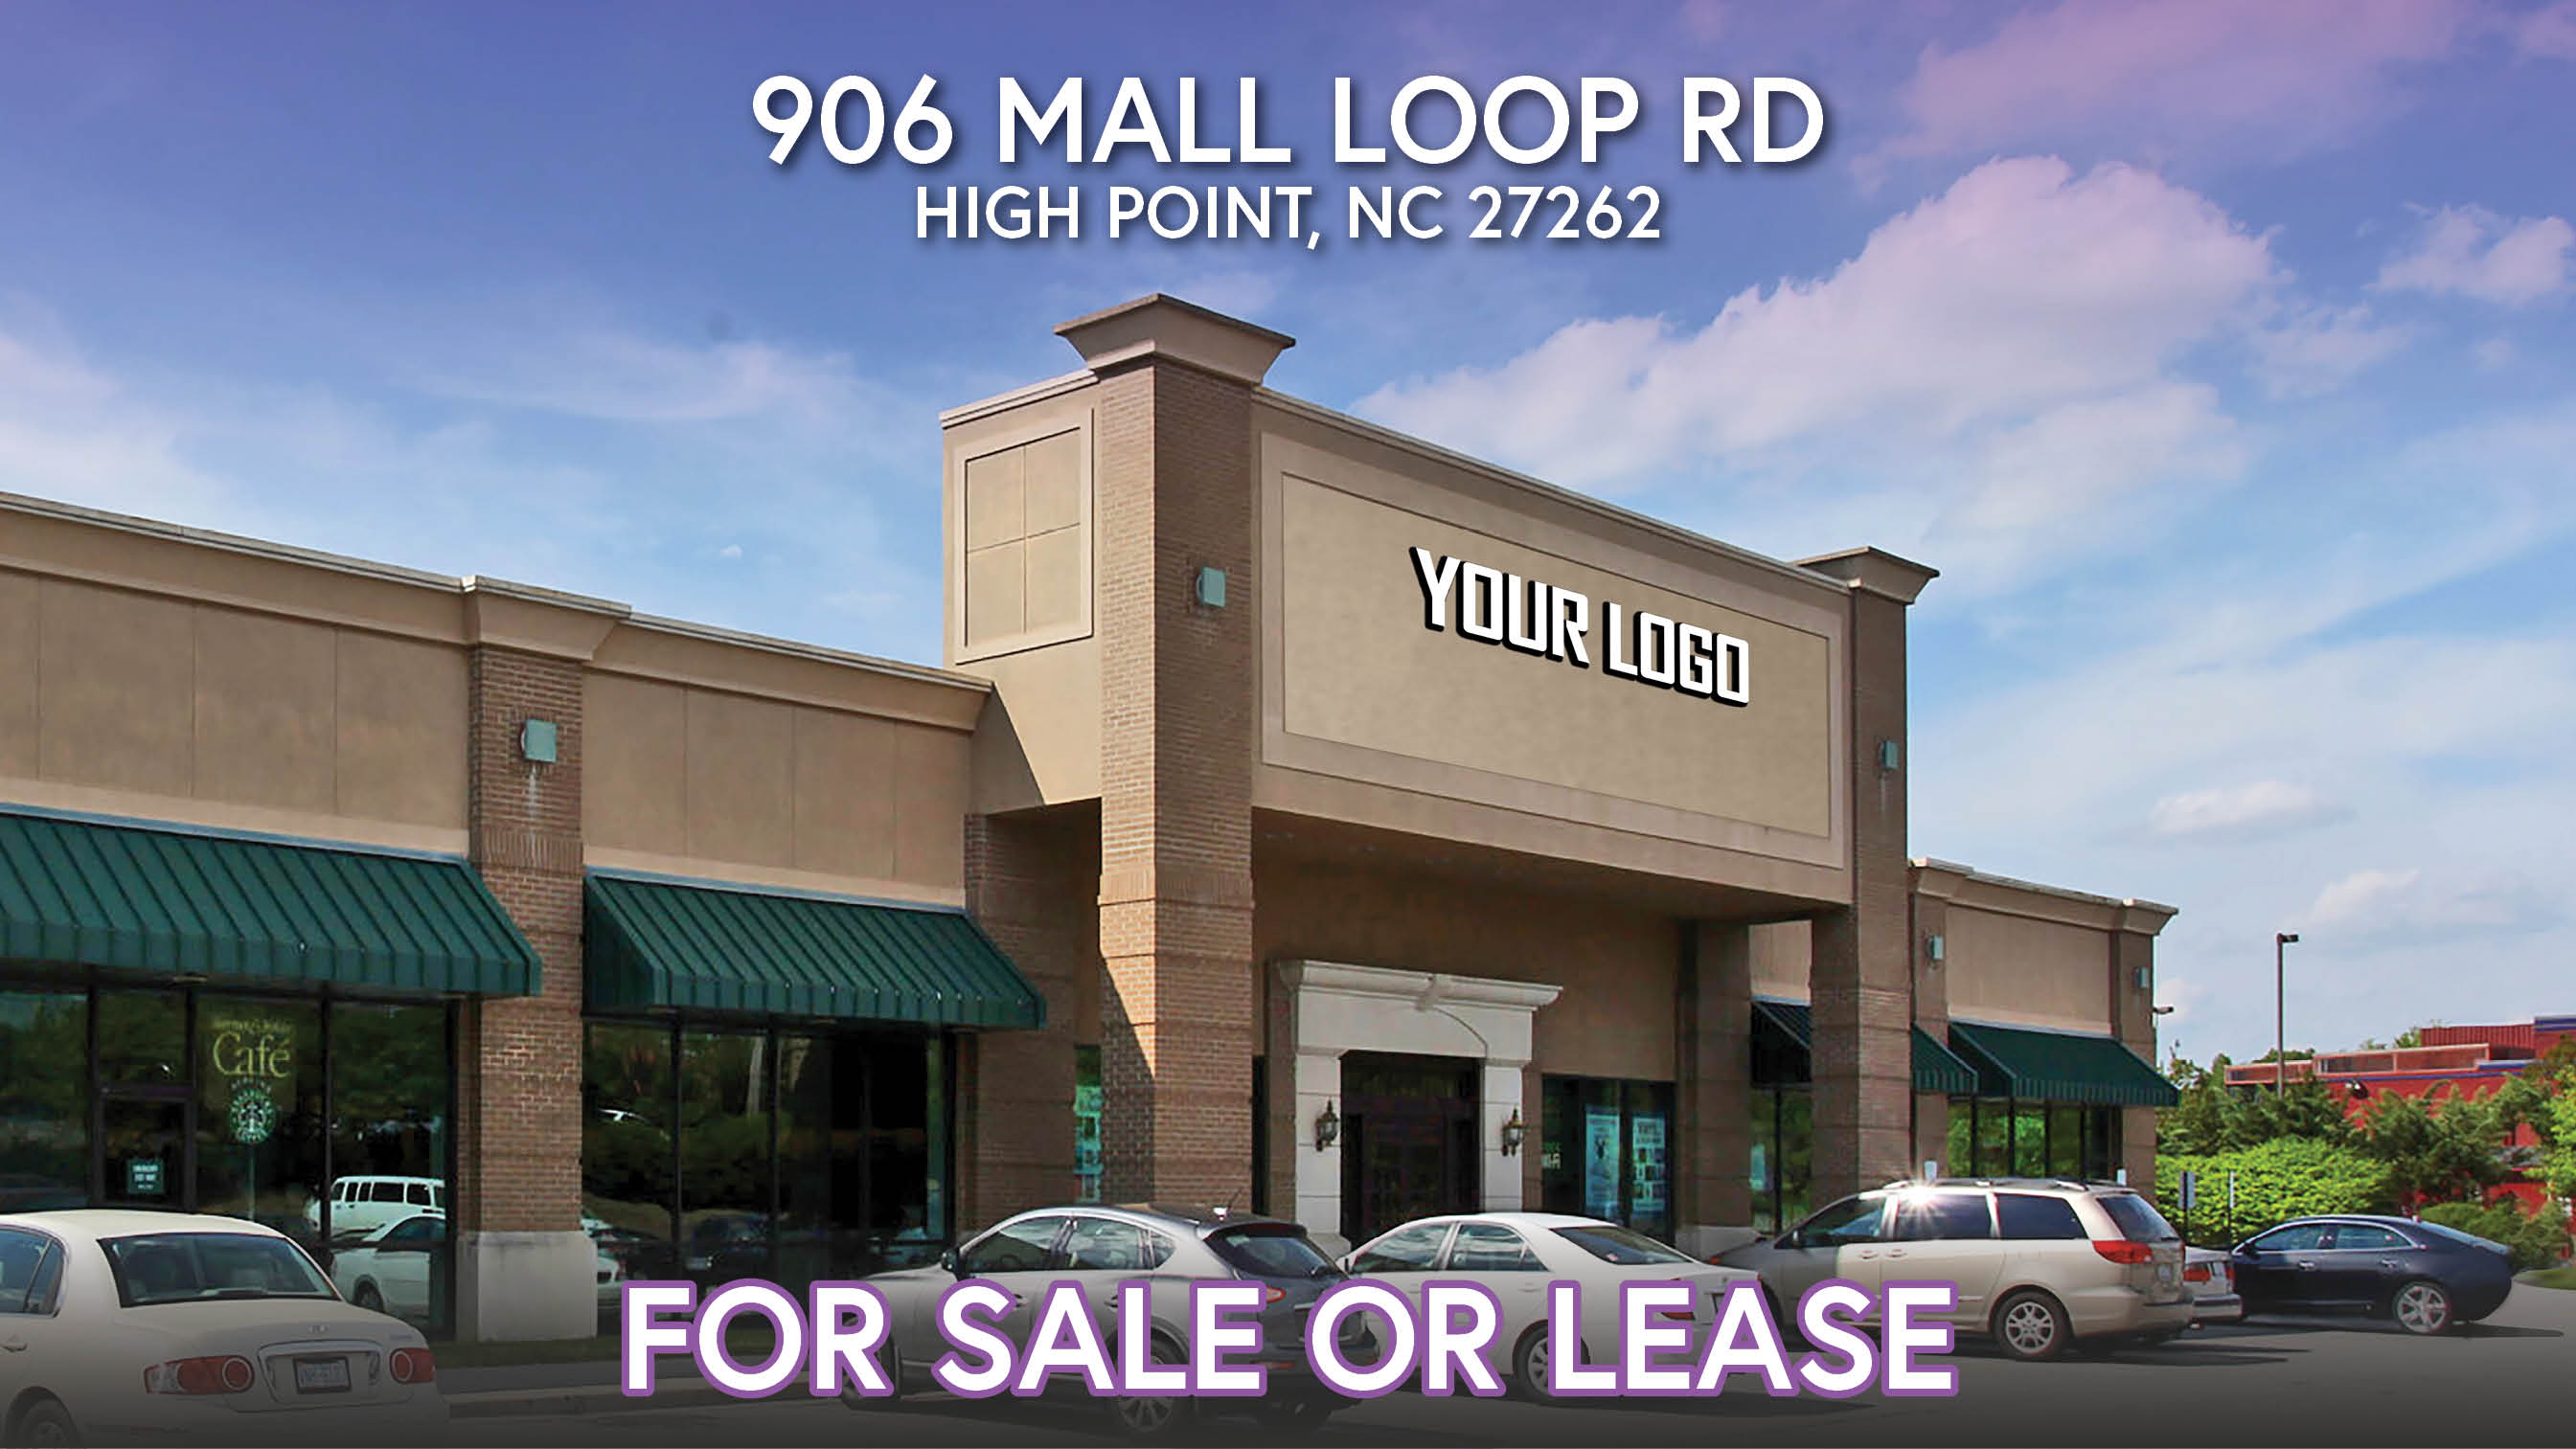 906 Mall Loop Rd, High Point, North Carolina 27262, ,Commercial,For Sale and/or Lease,Living Arts College,Mall Loop,1,1192